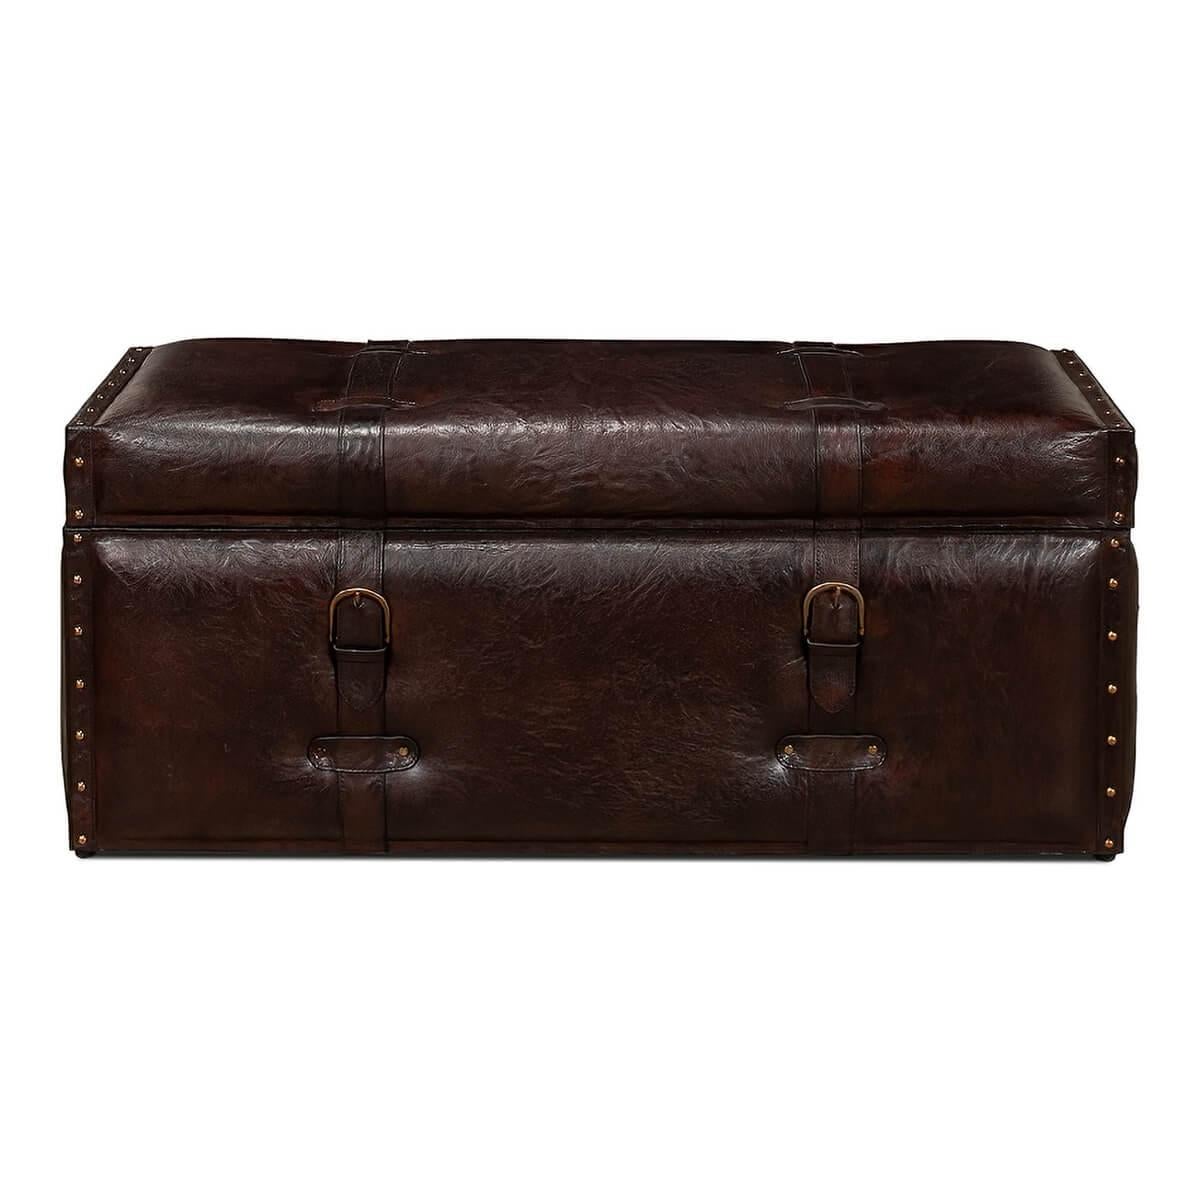 A vintage-style leather trunk bench with nailhead trim. The perfect addition to any room, this piece can be used for seating and storage. 

This piece is designed to have the look and feel of a vintage-style leather travel trunk and has design